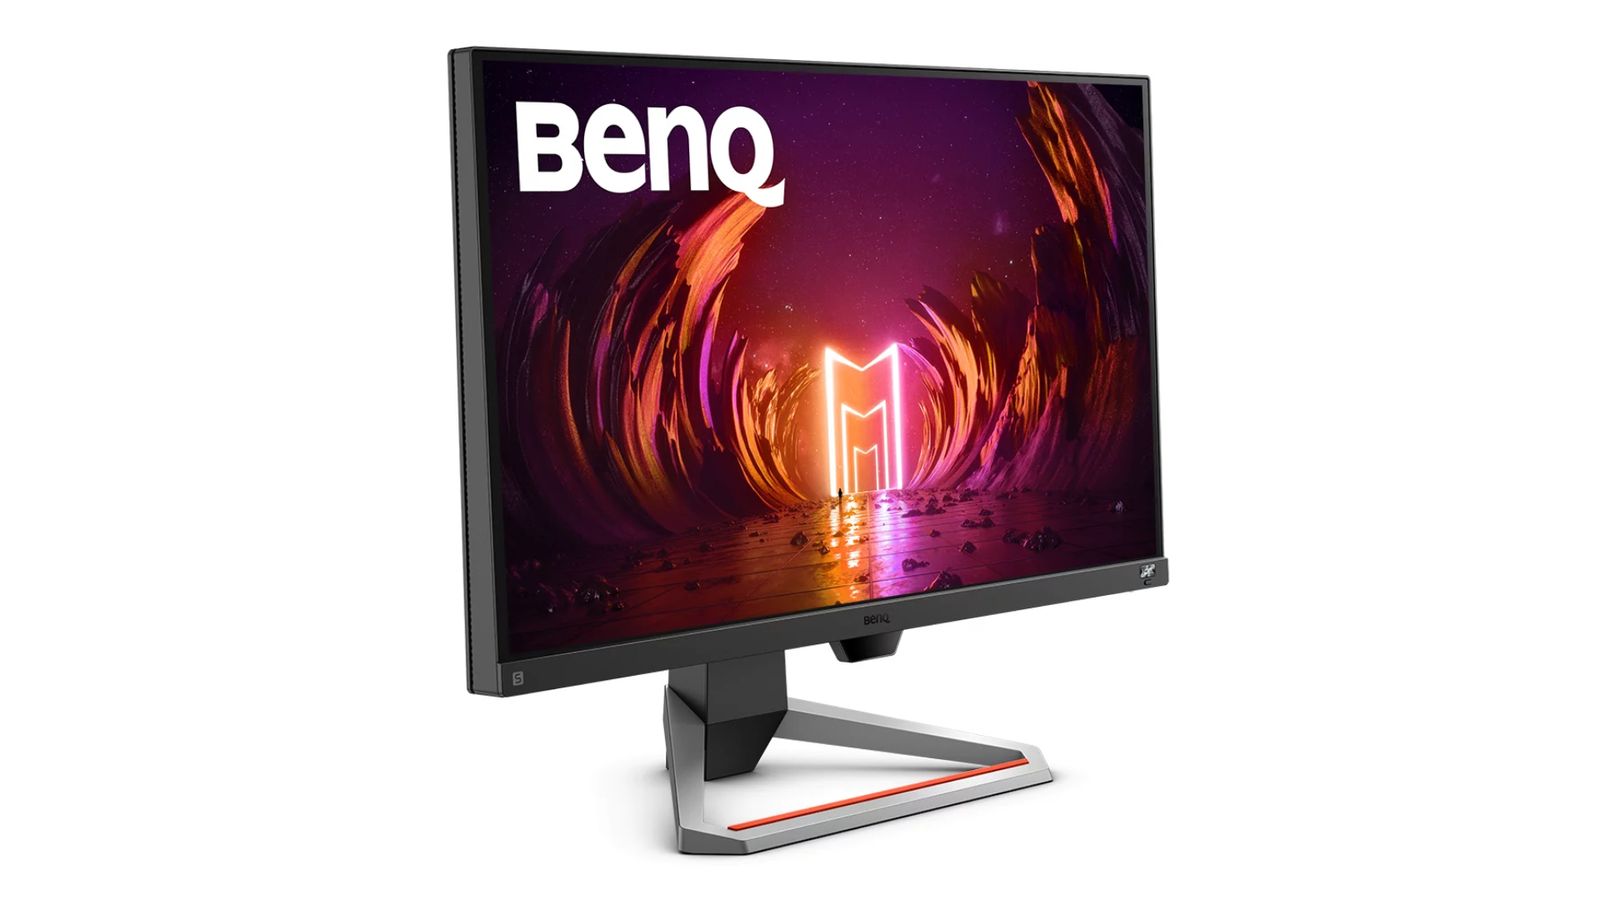 BenQ Mobiuz EX2710 product image of a dark grey monitor with an orange and pink lit up pathway on the display.